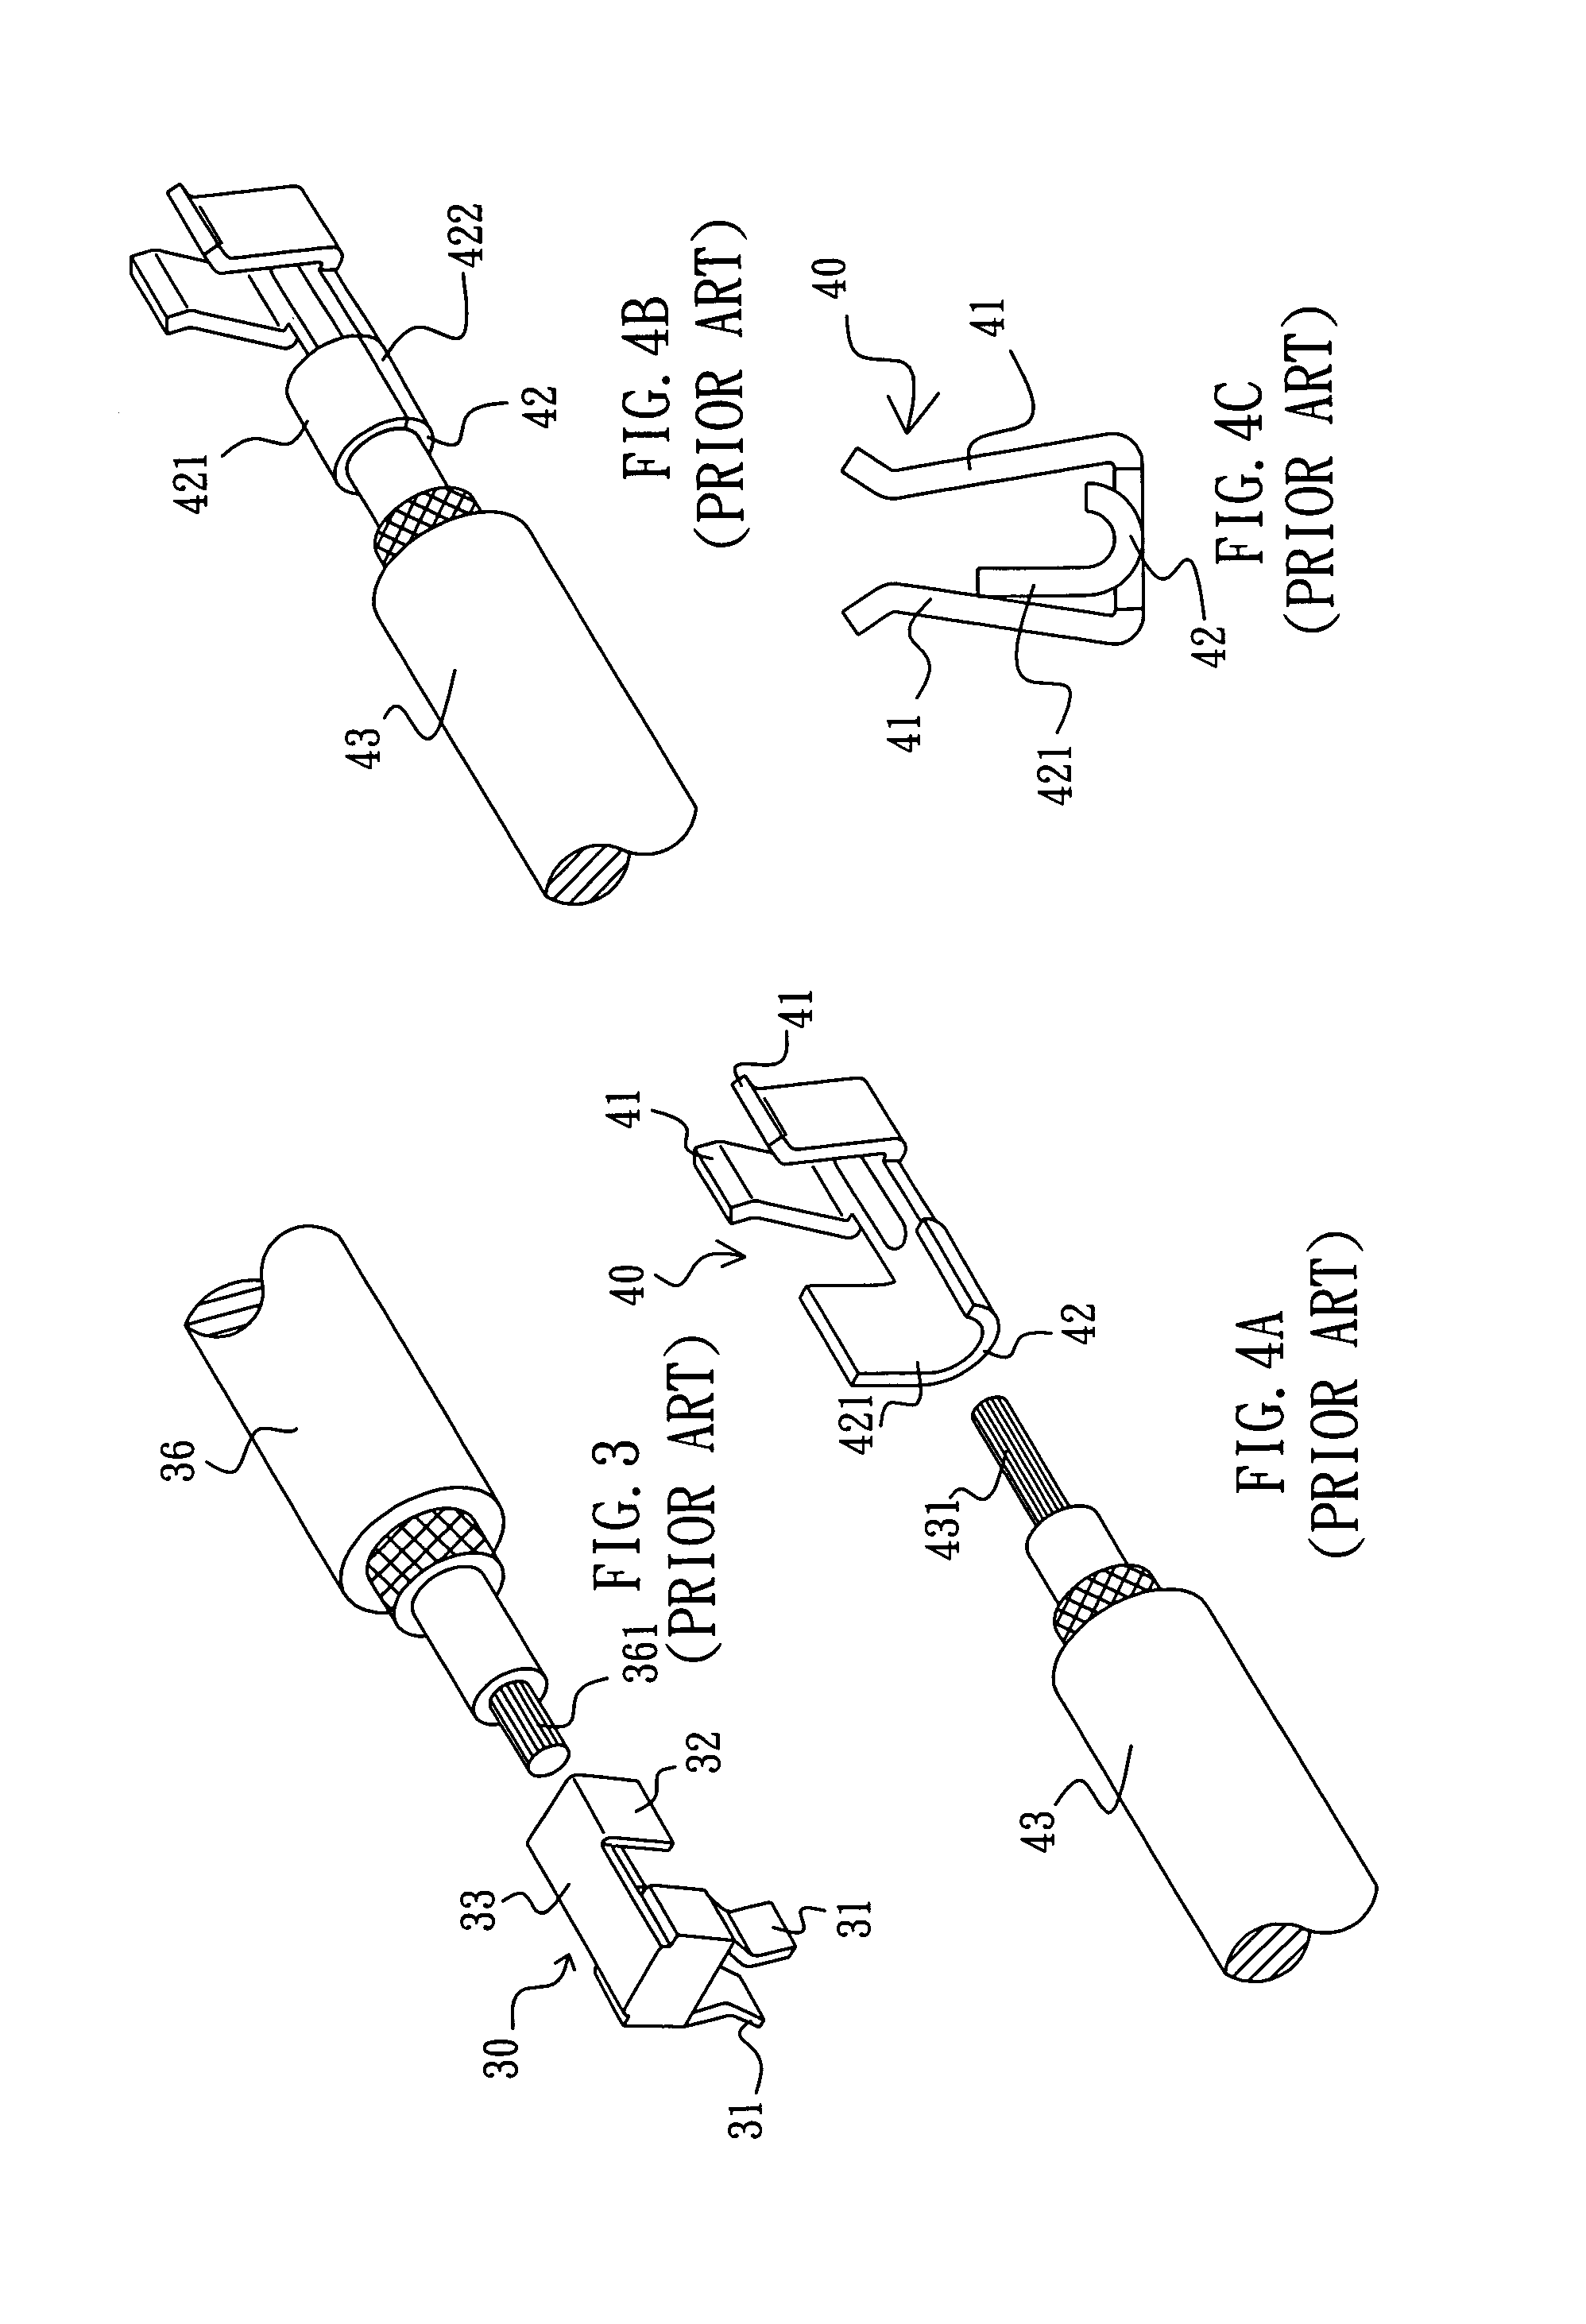 RF microwave connector for telecommunication